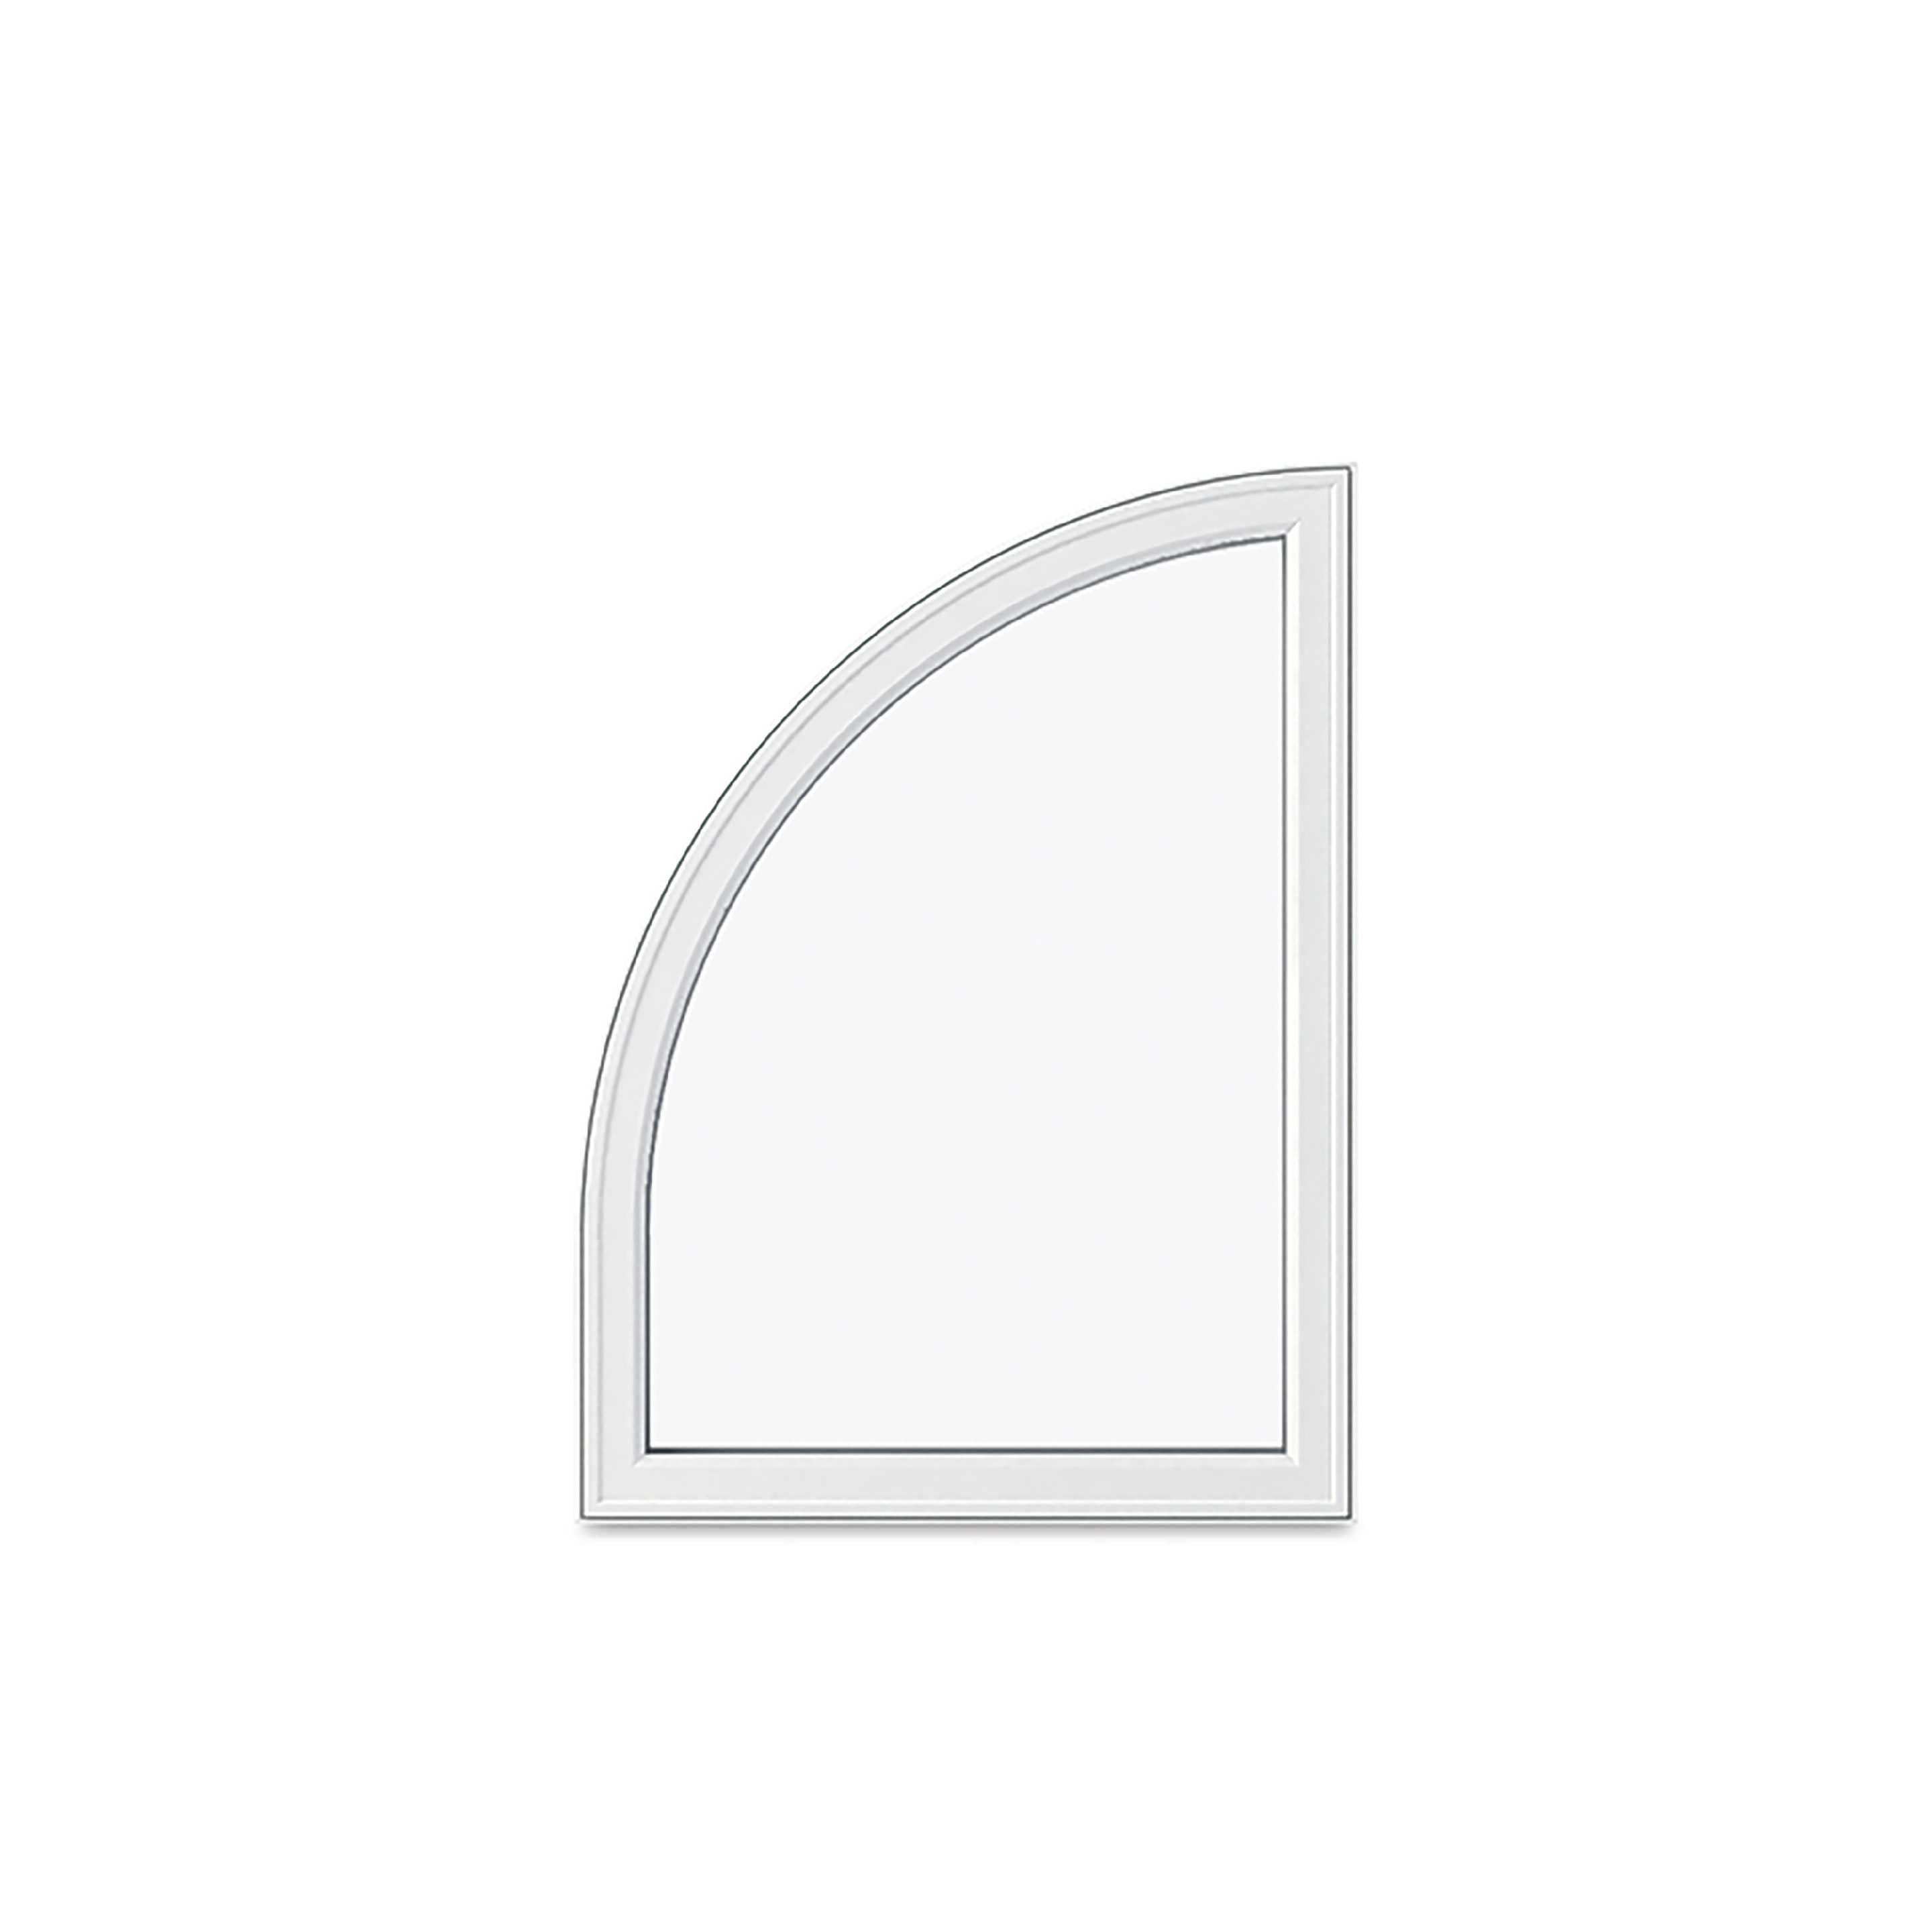 Image of a white Marvin Replacement arch window in a quarter round above springline style.